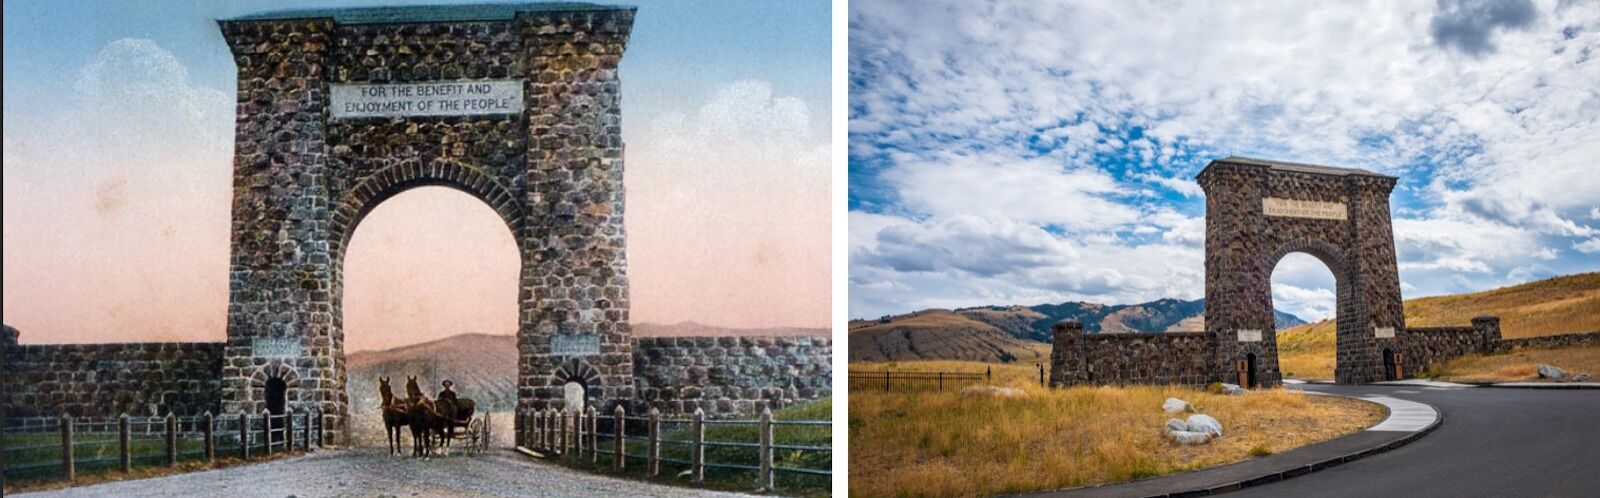 celebrating yellowstone history: the entrance gate then and now 